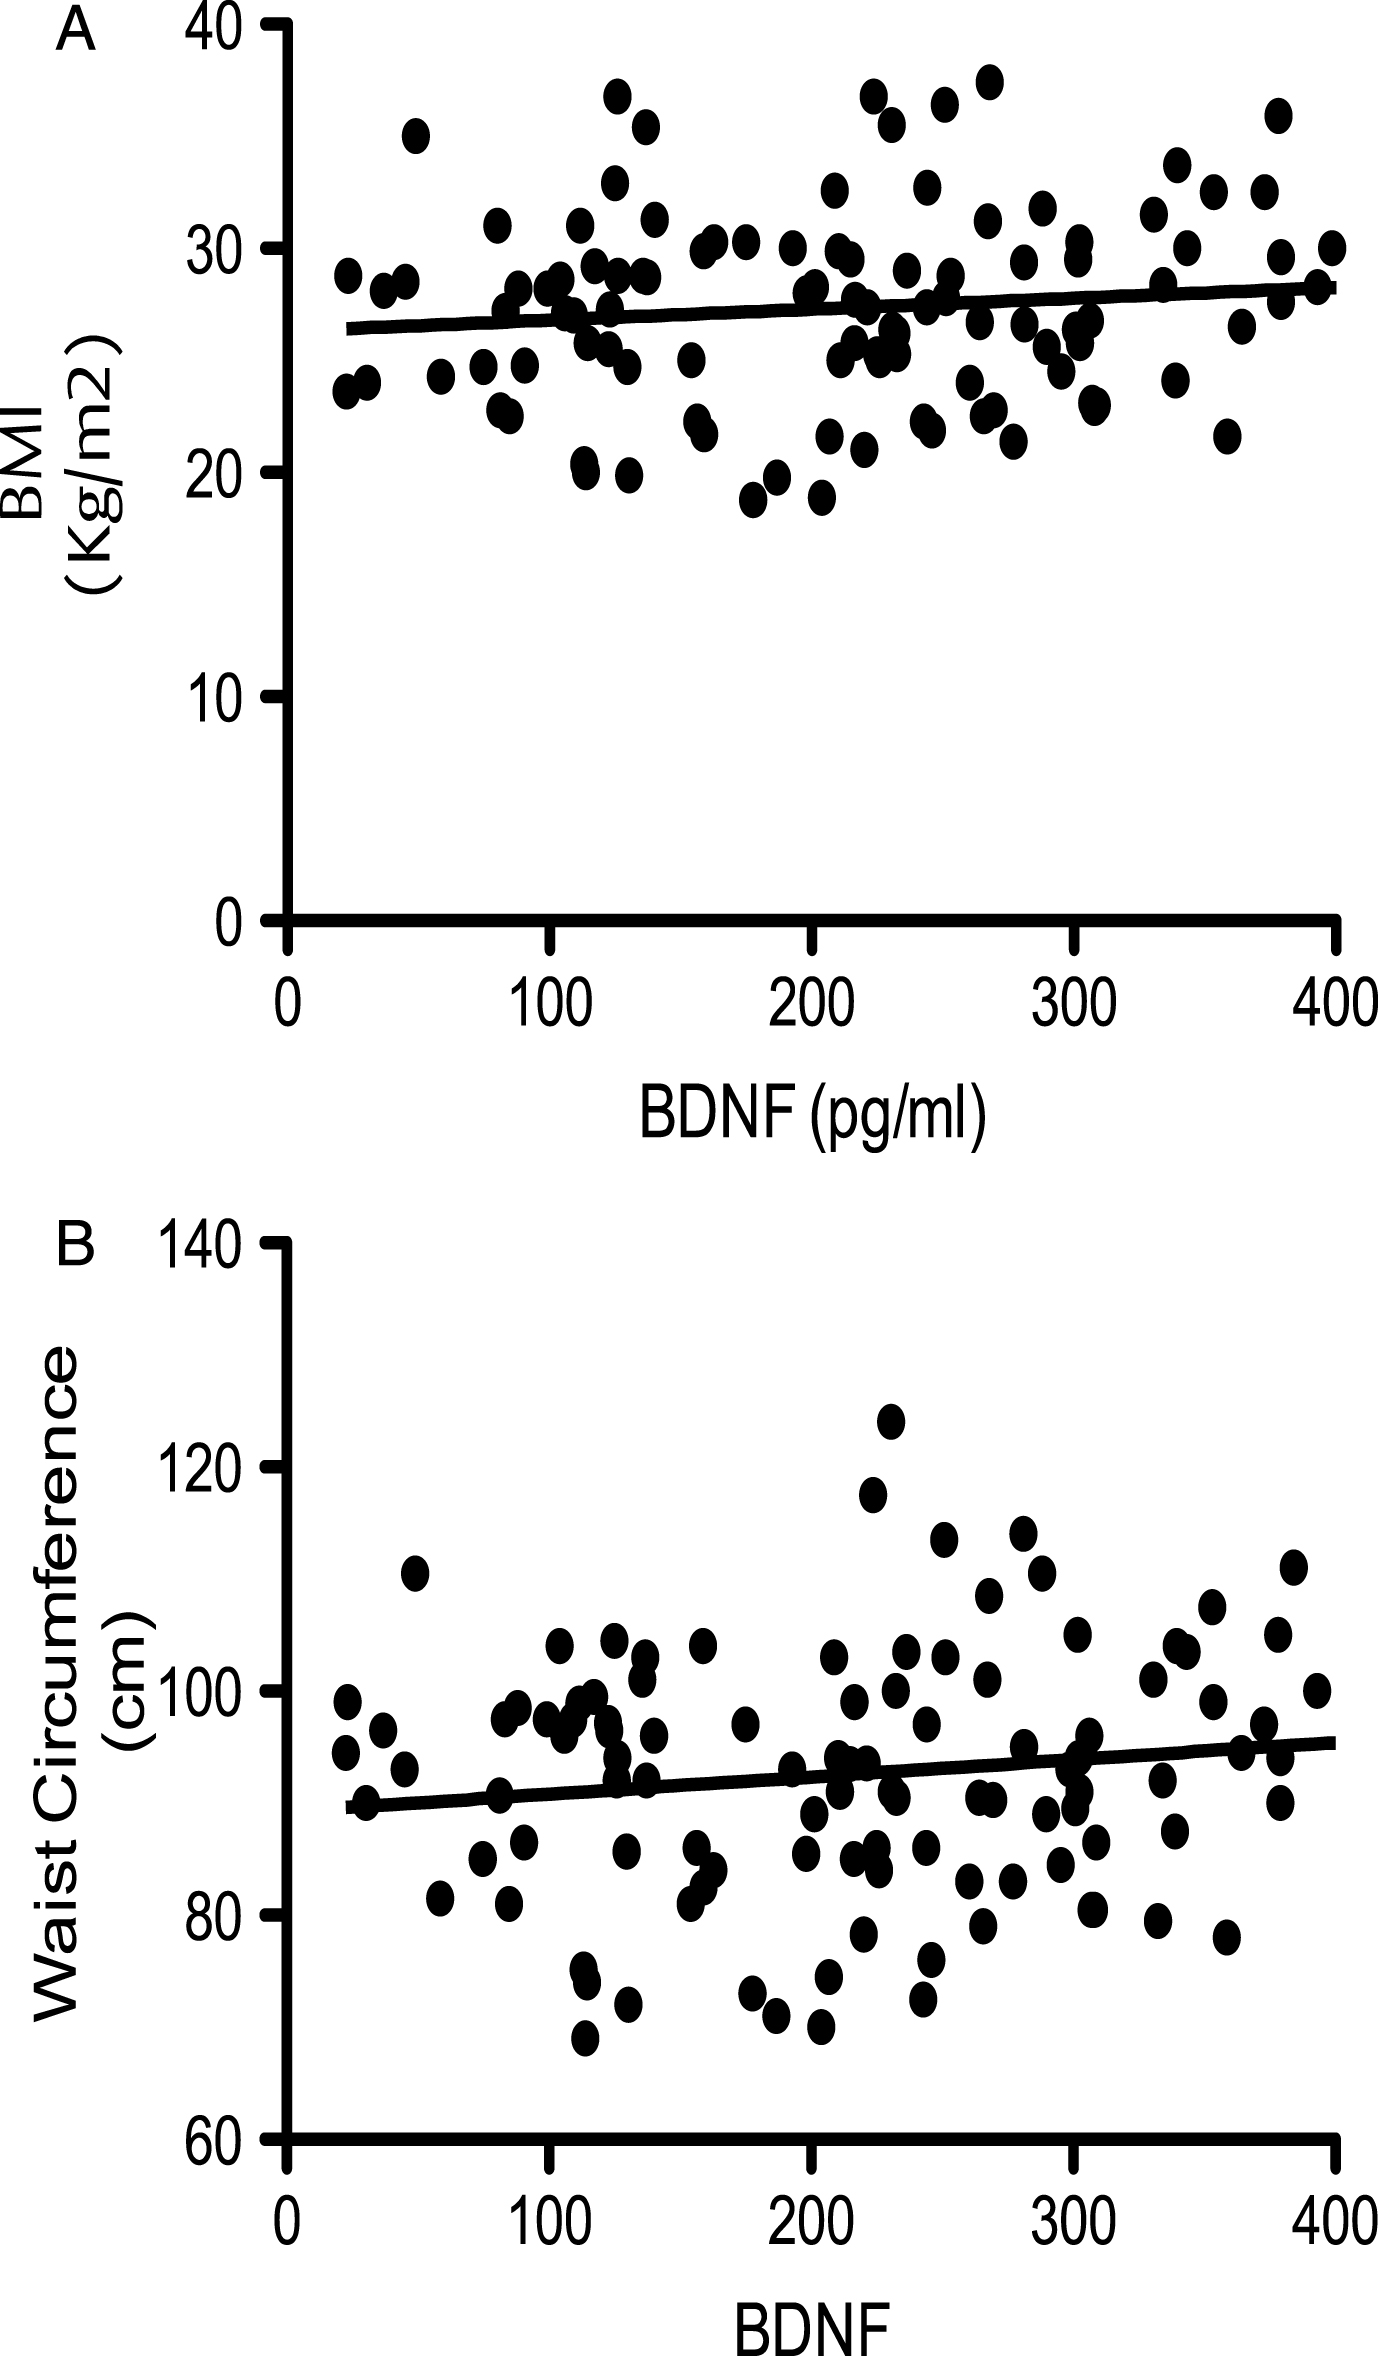 Corellation of BDNF with bidy mass index (BMI; panel A) and waist circumferance (WC; panel B). No signitivent correlations were observed (p > 0.05; n = 112)